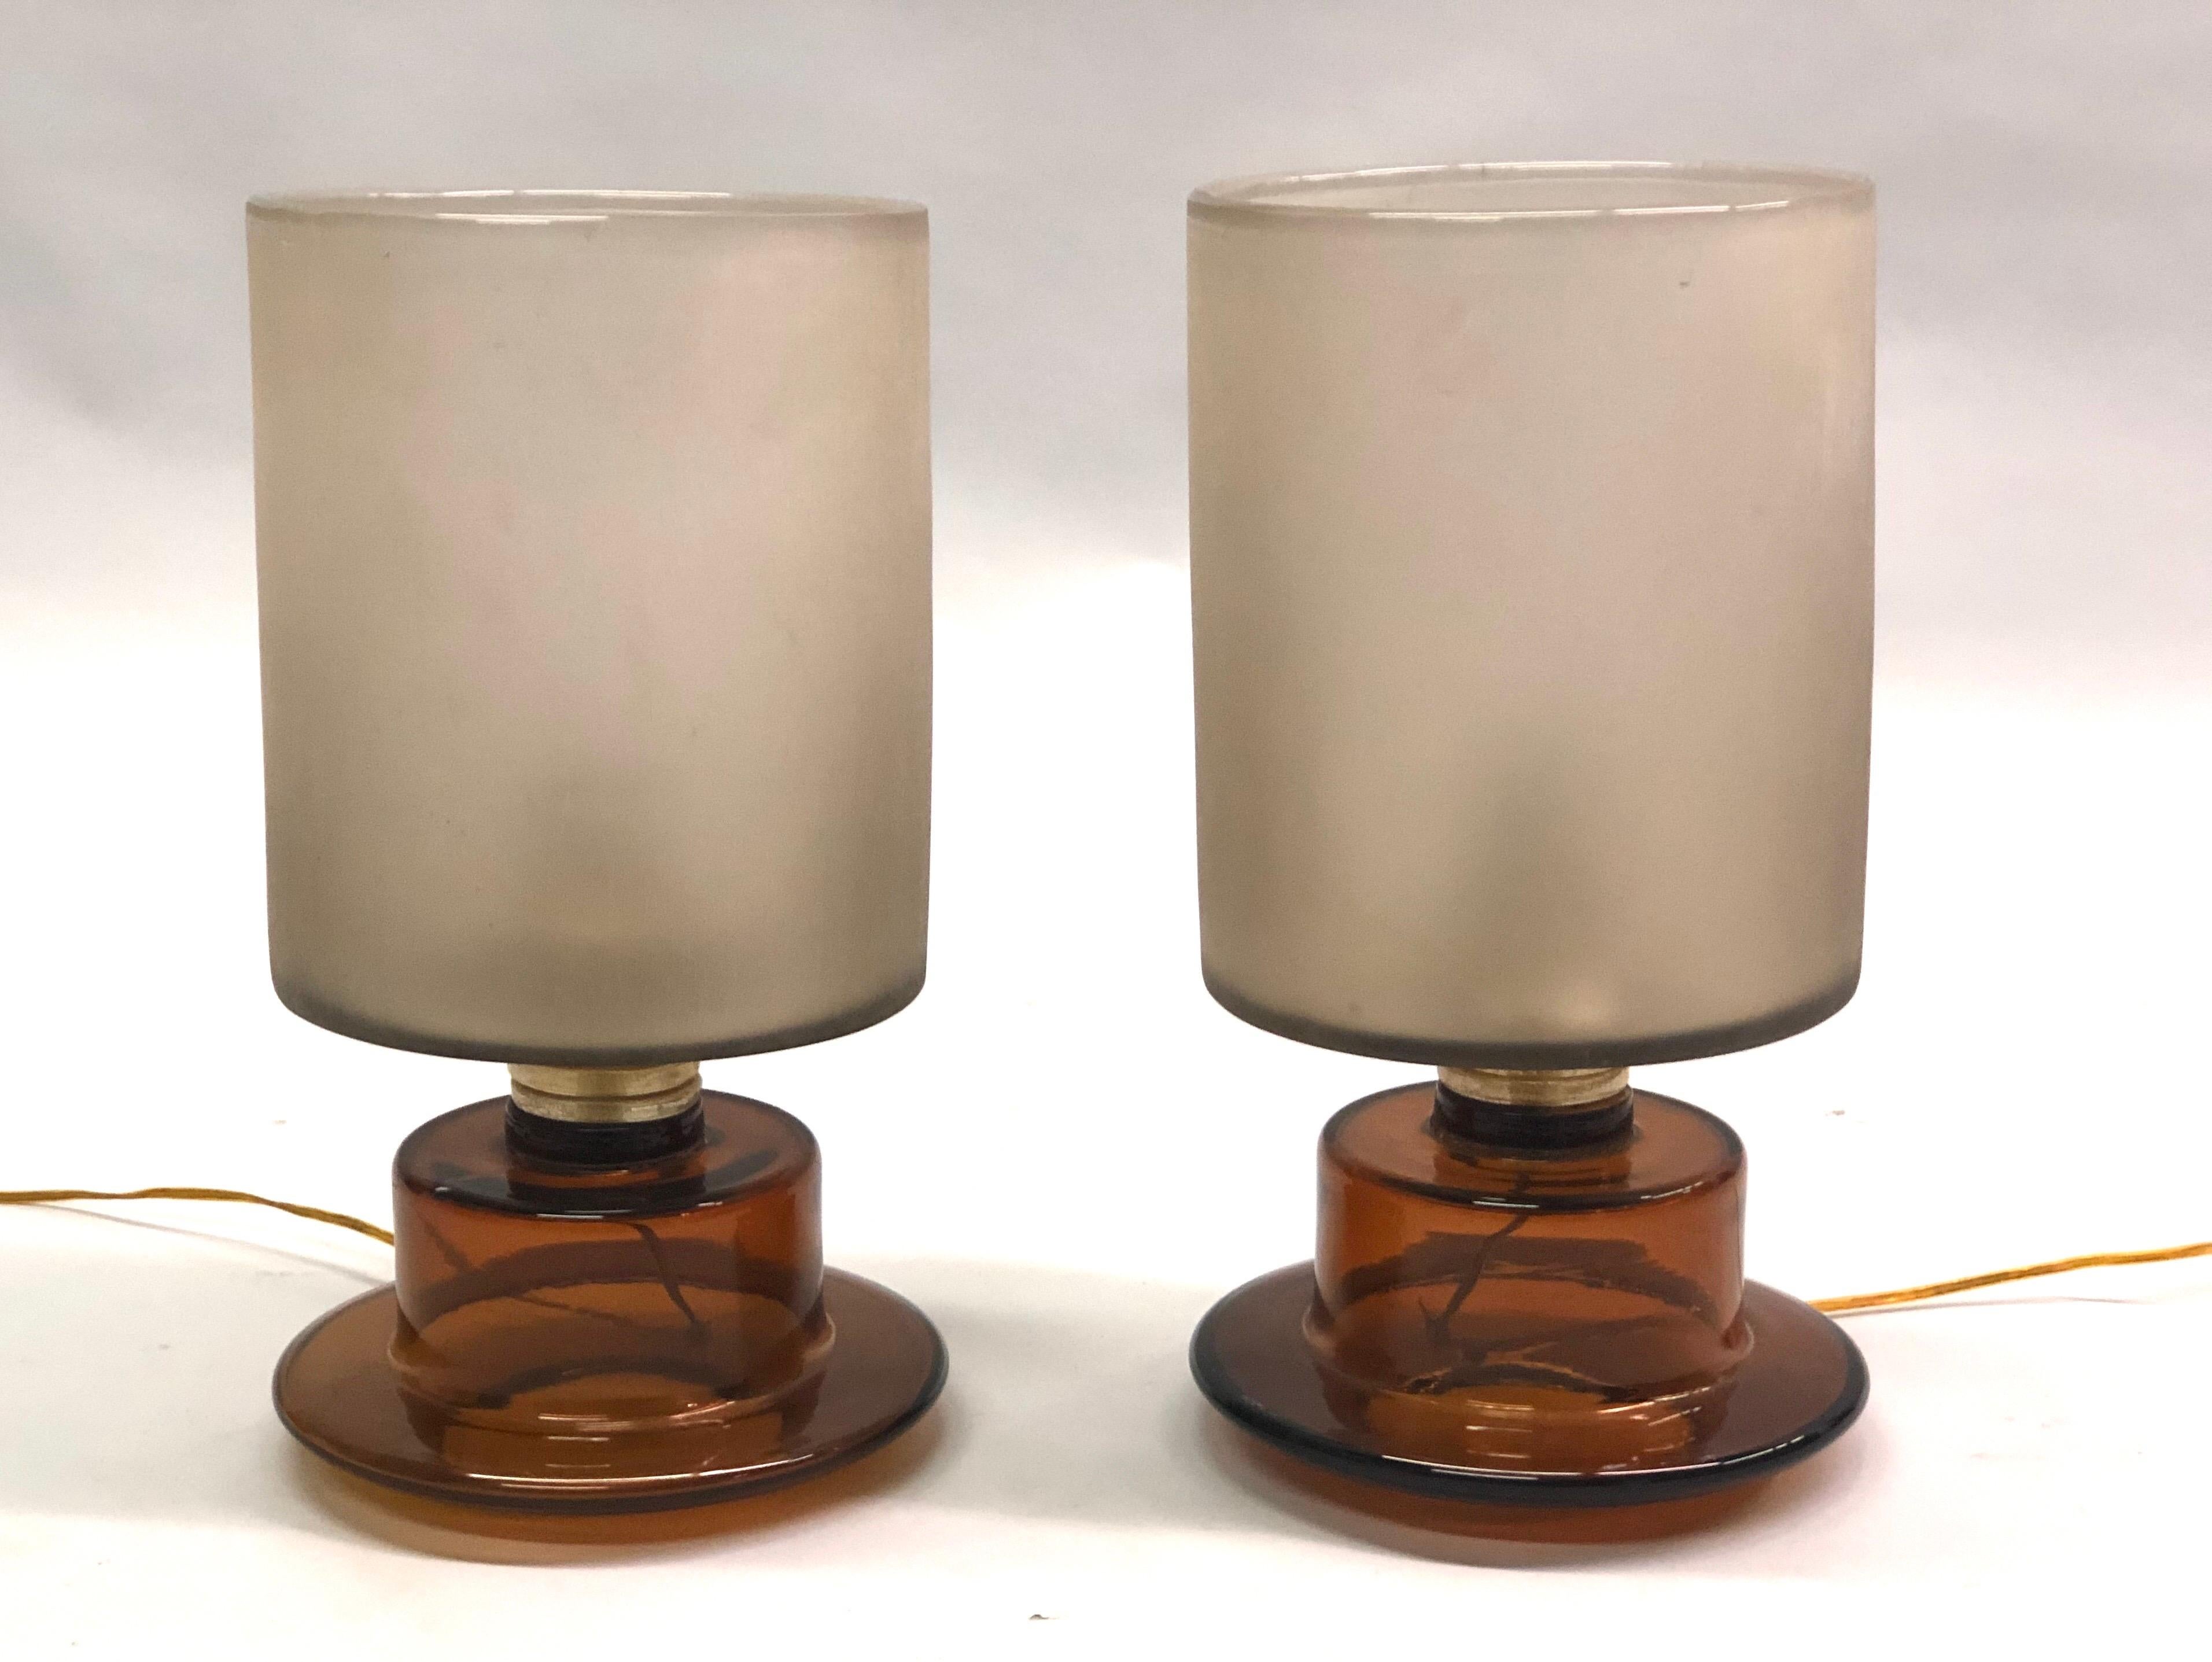 Elegant, timeless pair of Italian Mid-Century Modern neoclassical hand blown Murano glass table lamps in the form of vases by Seguso Vetri d'Arte.

Materials: Amber Murano glass bases, gold flecked clear Murano glass stems and opaque satinized